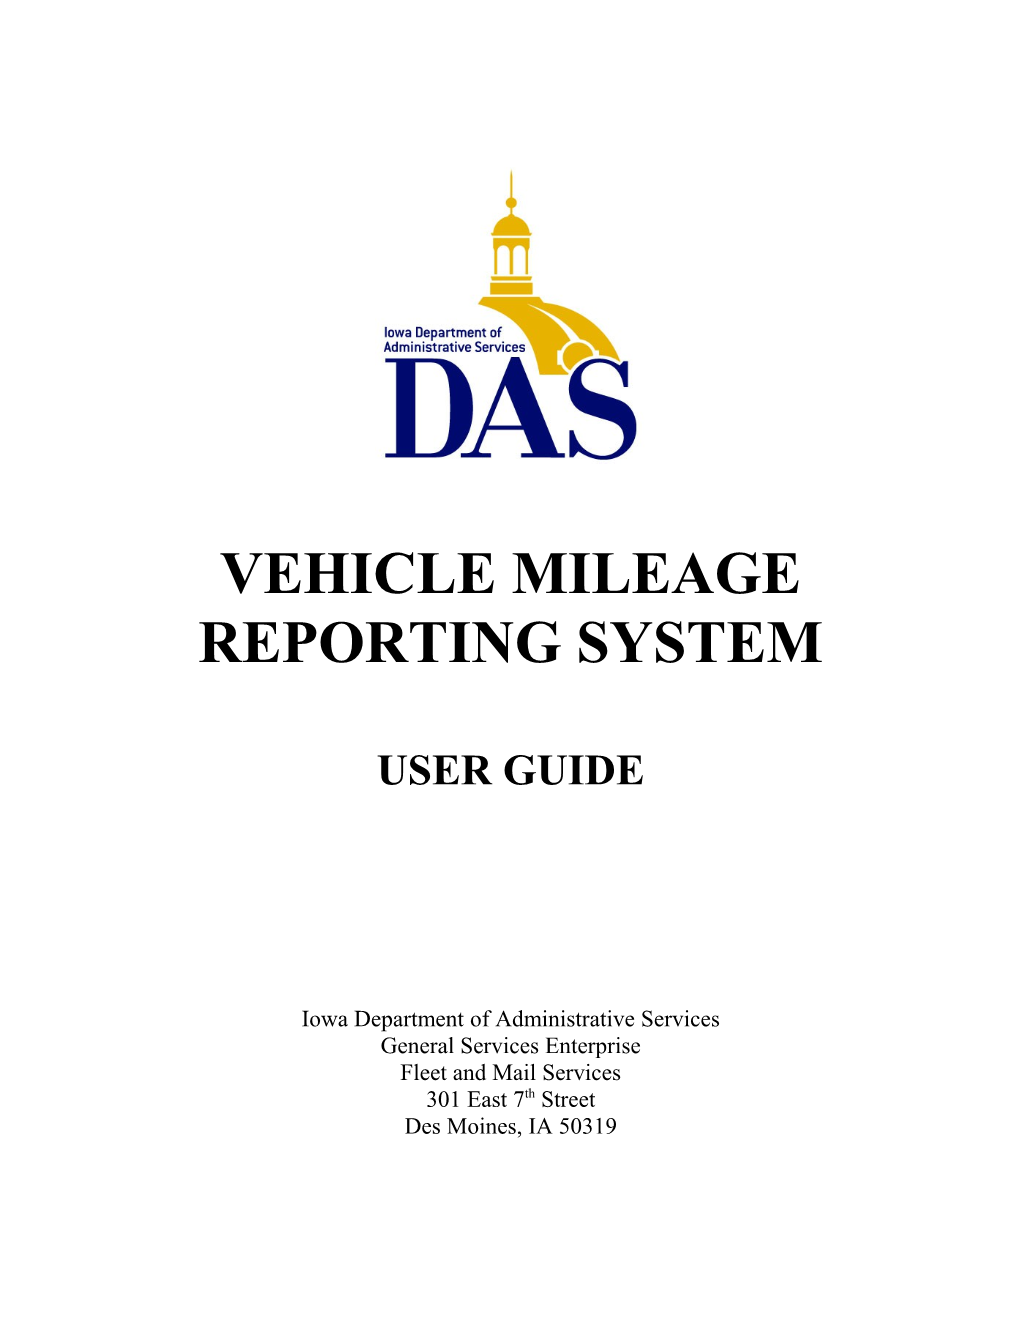 Vehicle Mileage Reporting System